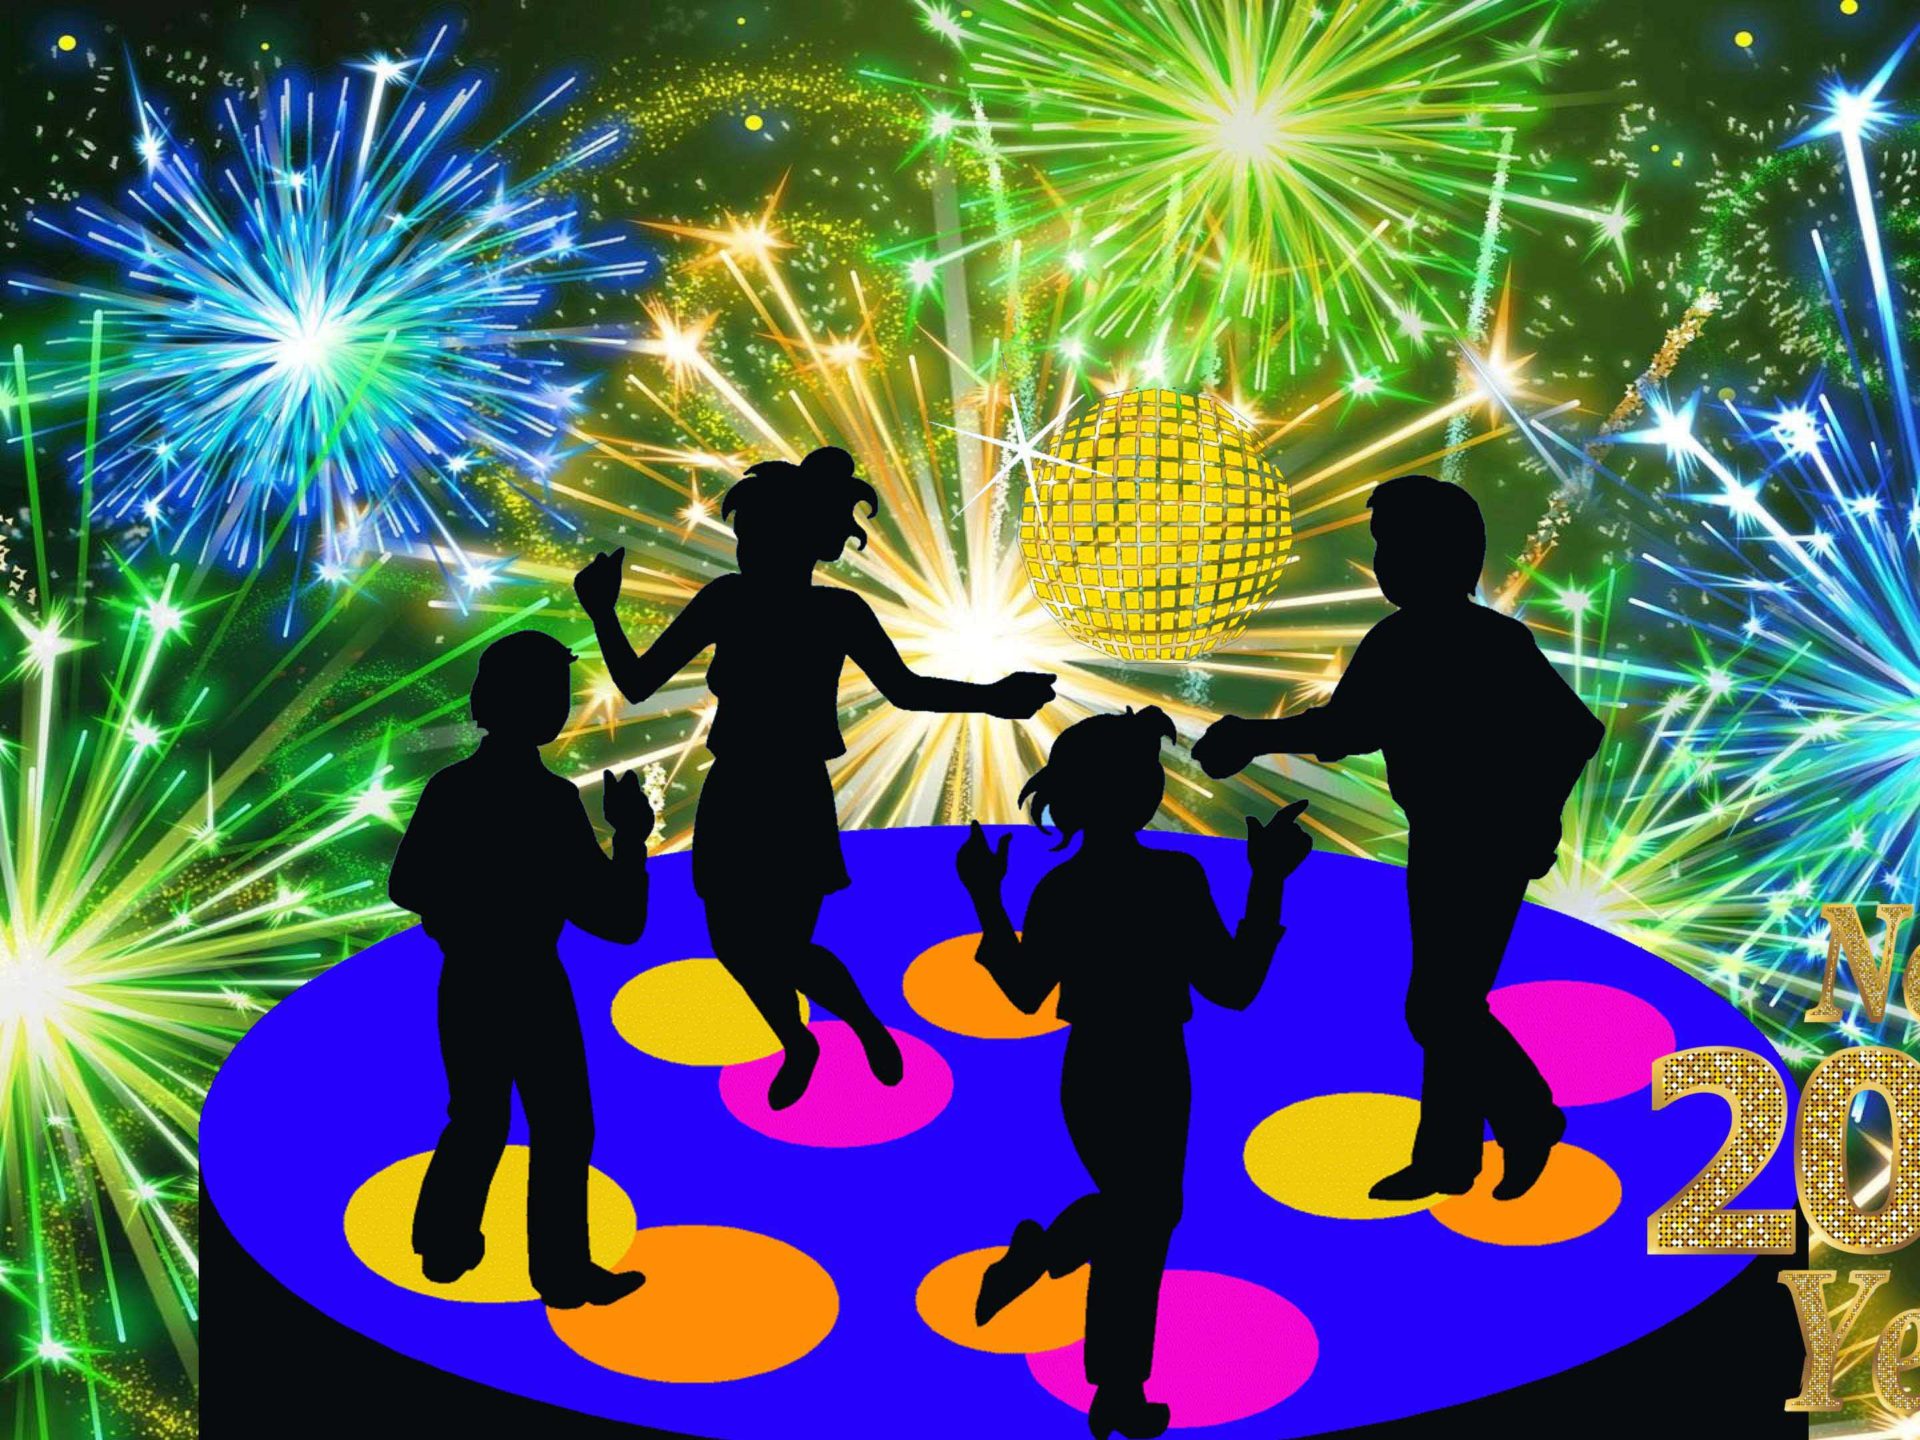 New Year's Eve 2022 Disco Music Dancing Celebration Fireworks Greeting Card New Year HD Wallpaper For Mobile Phones And Computer, Wallpaper13.com